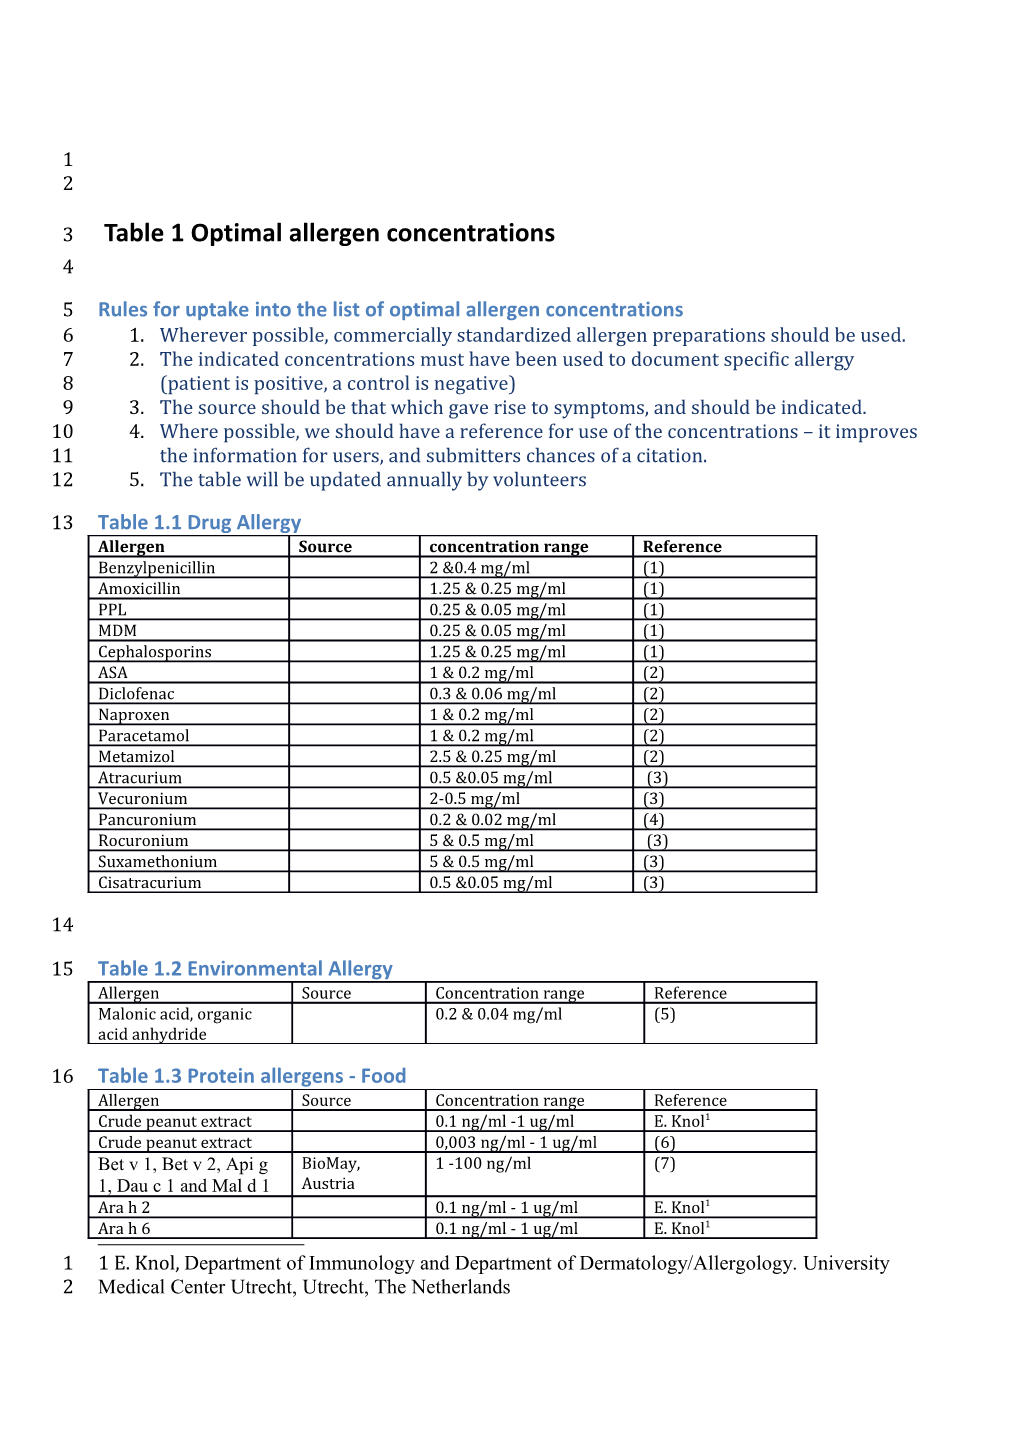 Rules for Uptake Into the List of Optimal Allergen Concentrations